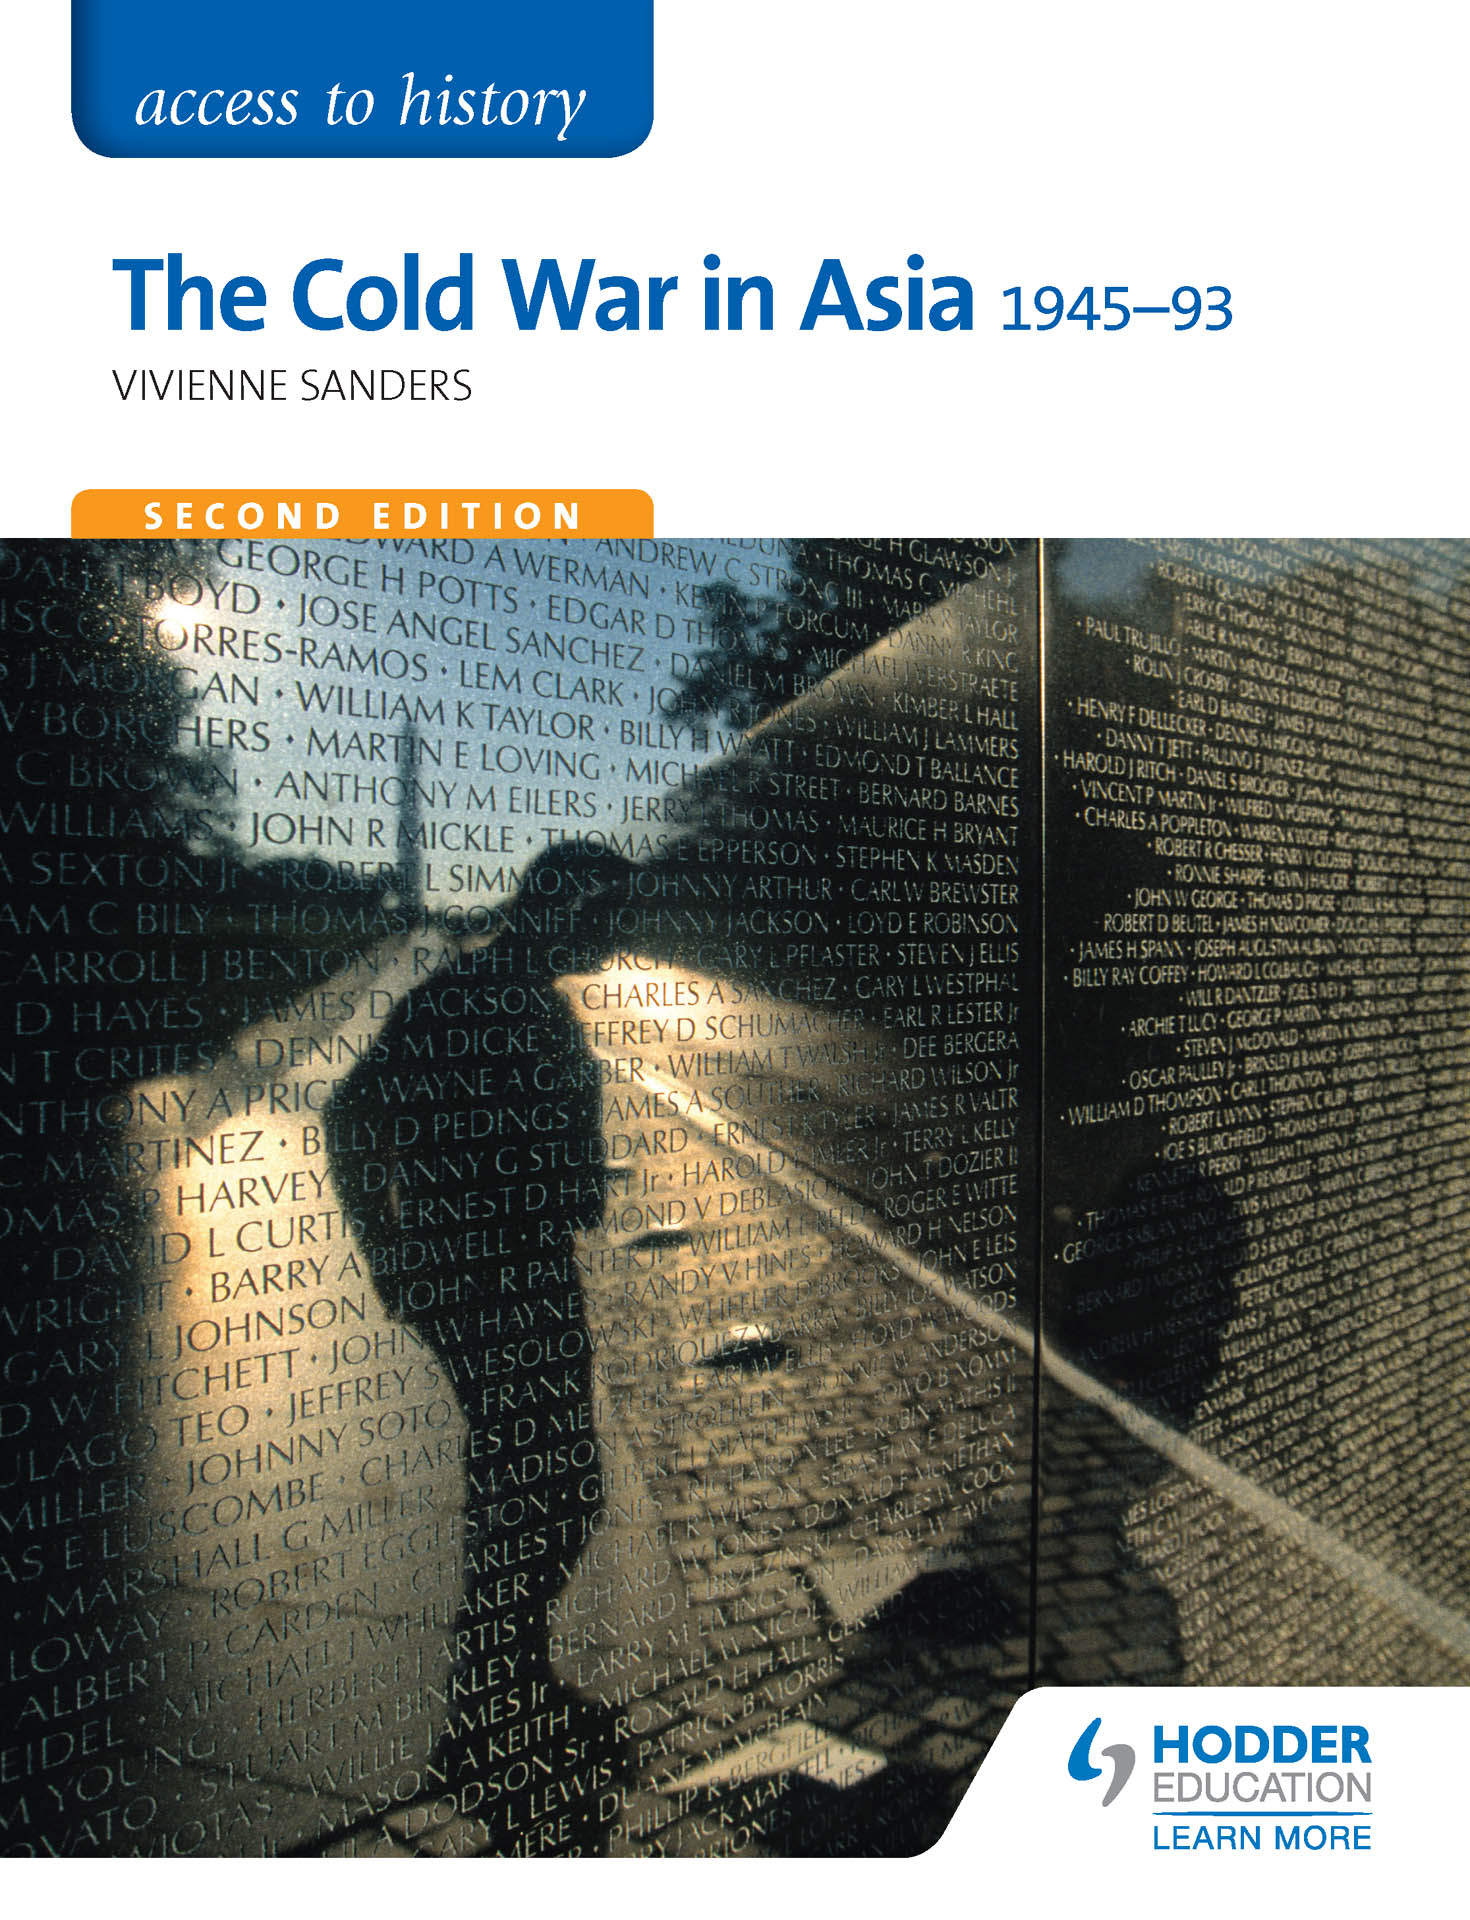 Access to History: The Cold War in Asia 1945-93 for OCR 2nd Ed